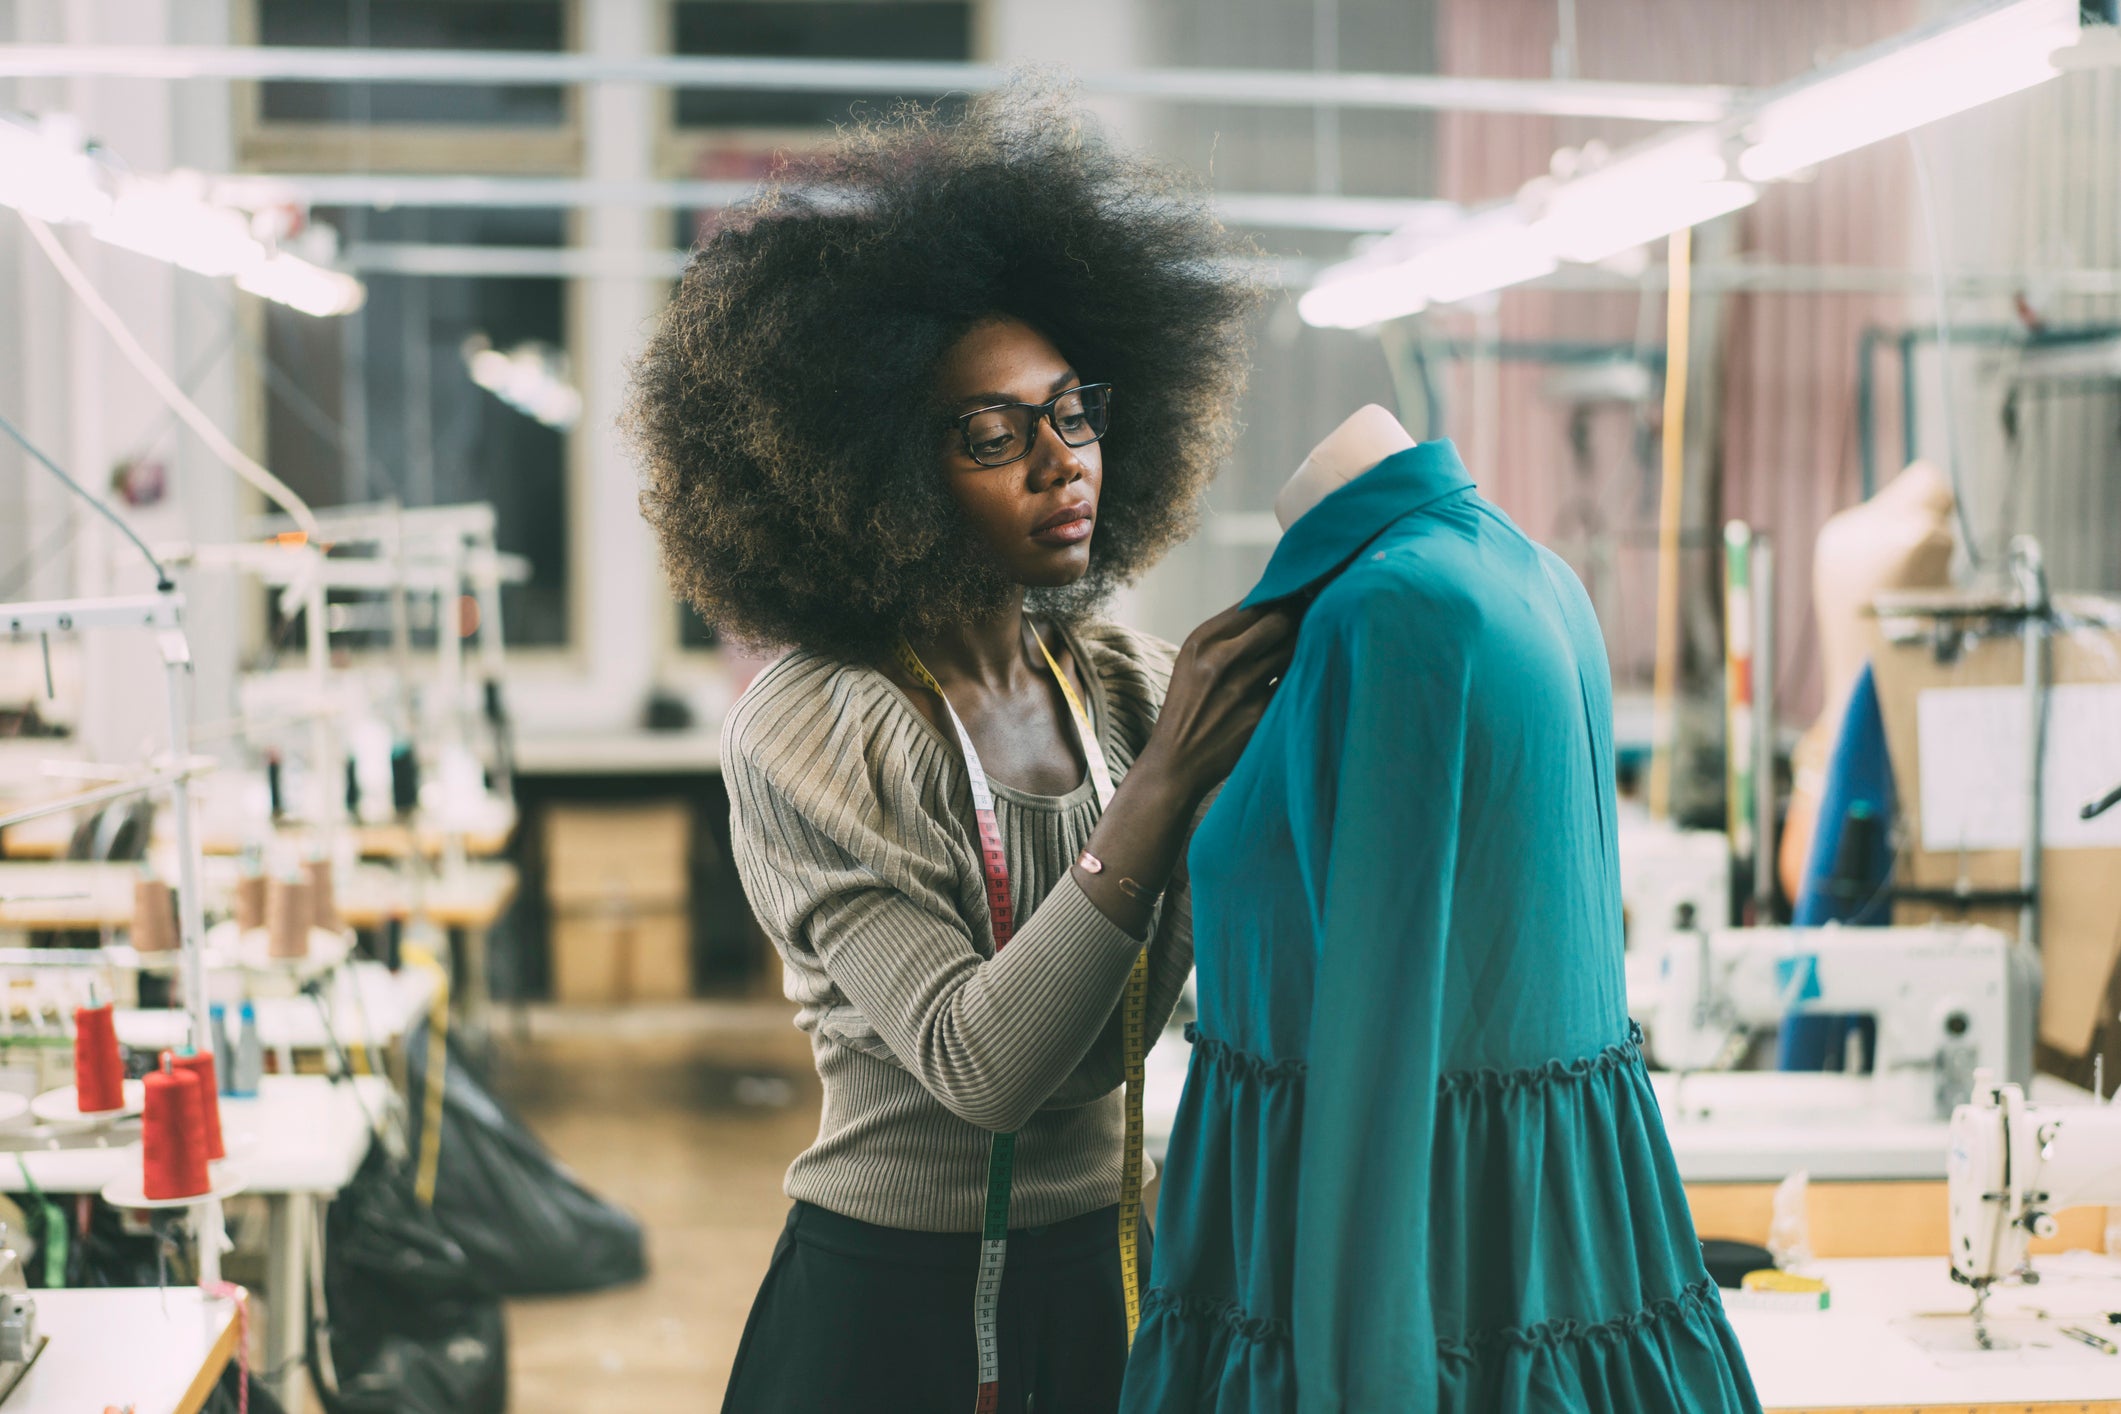 Fred Segal, Black In Fashion Council And Mastercard Join Forces To Offer $10K Grant For Up & Coming Designers